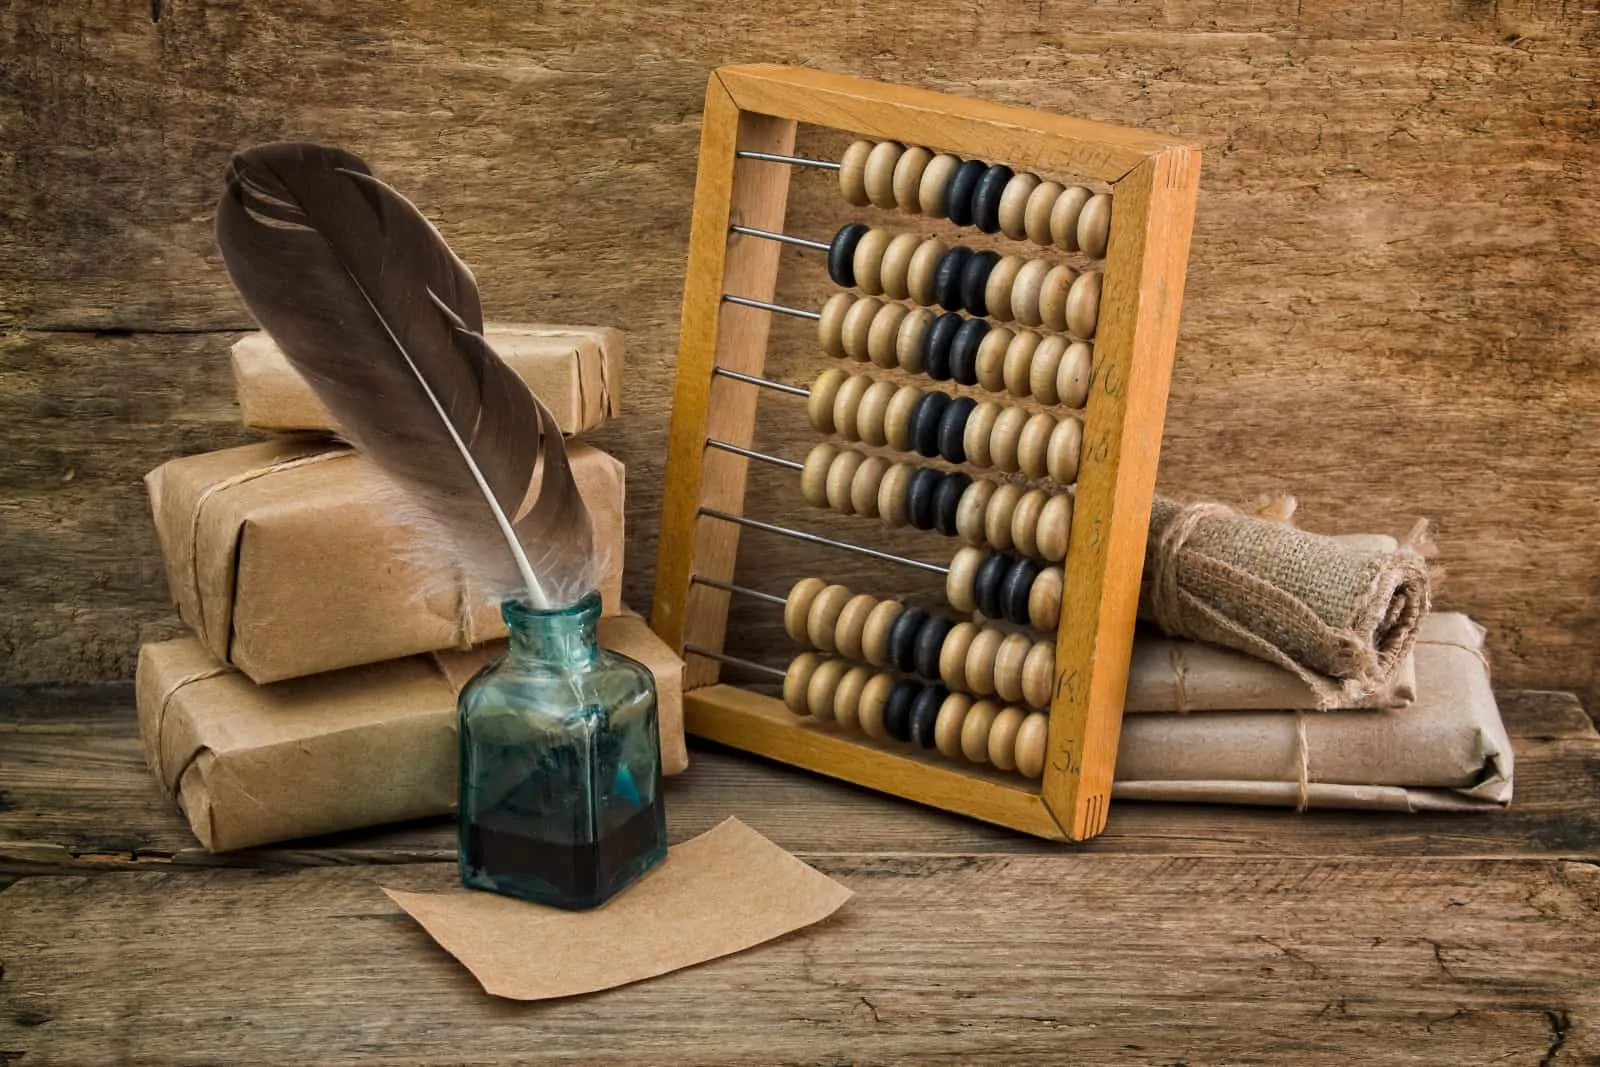 Old-Time Bookkeeping devices: abacus and ink pot + feather quill